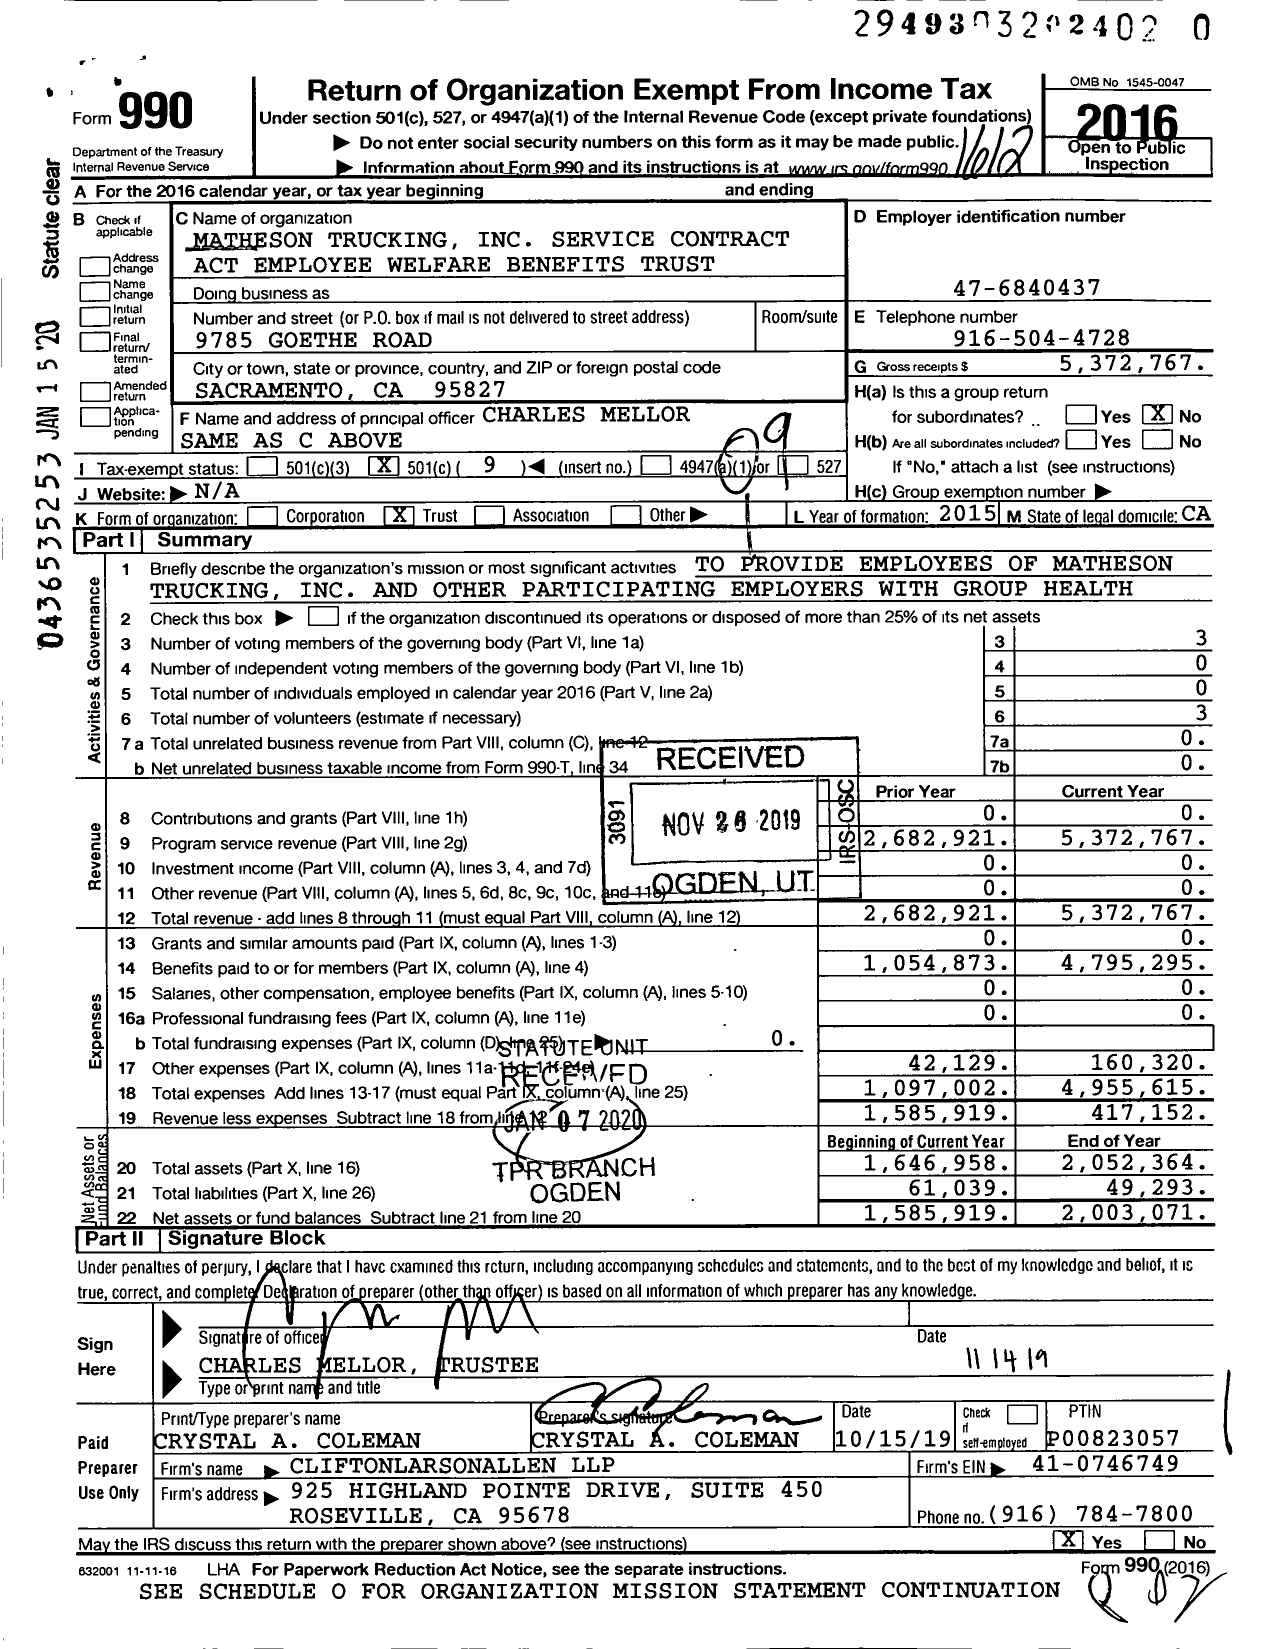 Image of first page of 2016 Form 990O for Matheson Trucking Service Contract Act Employee Welfare Benefits Trust